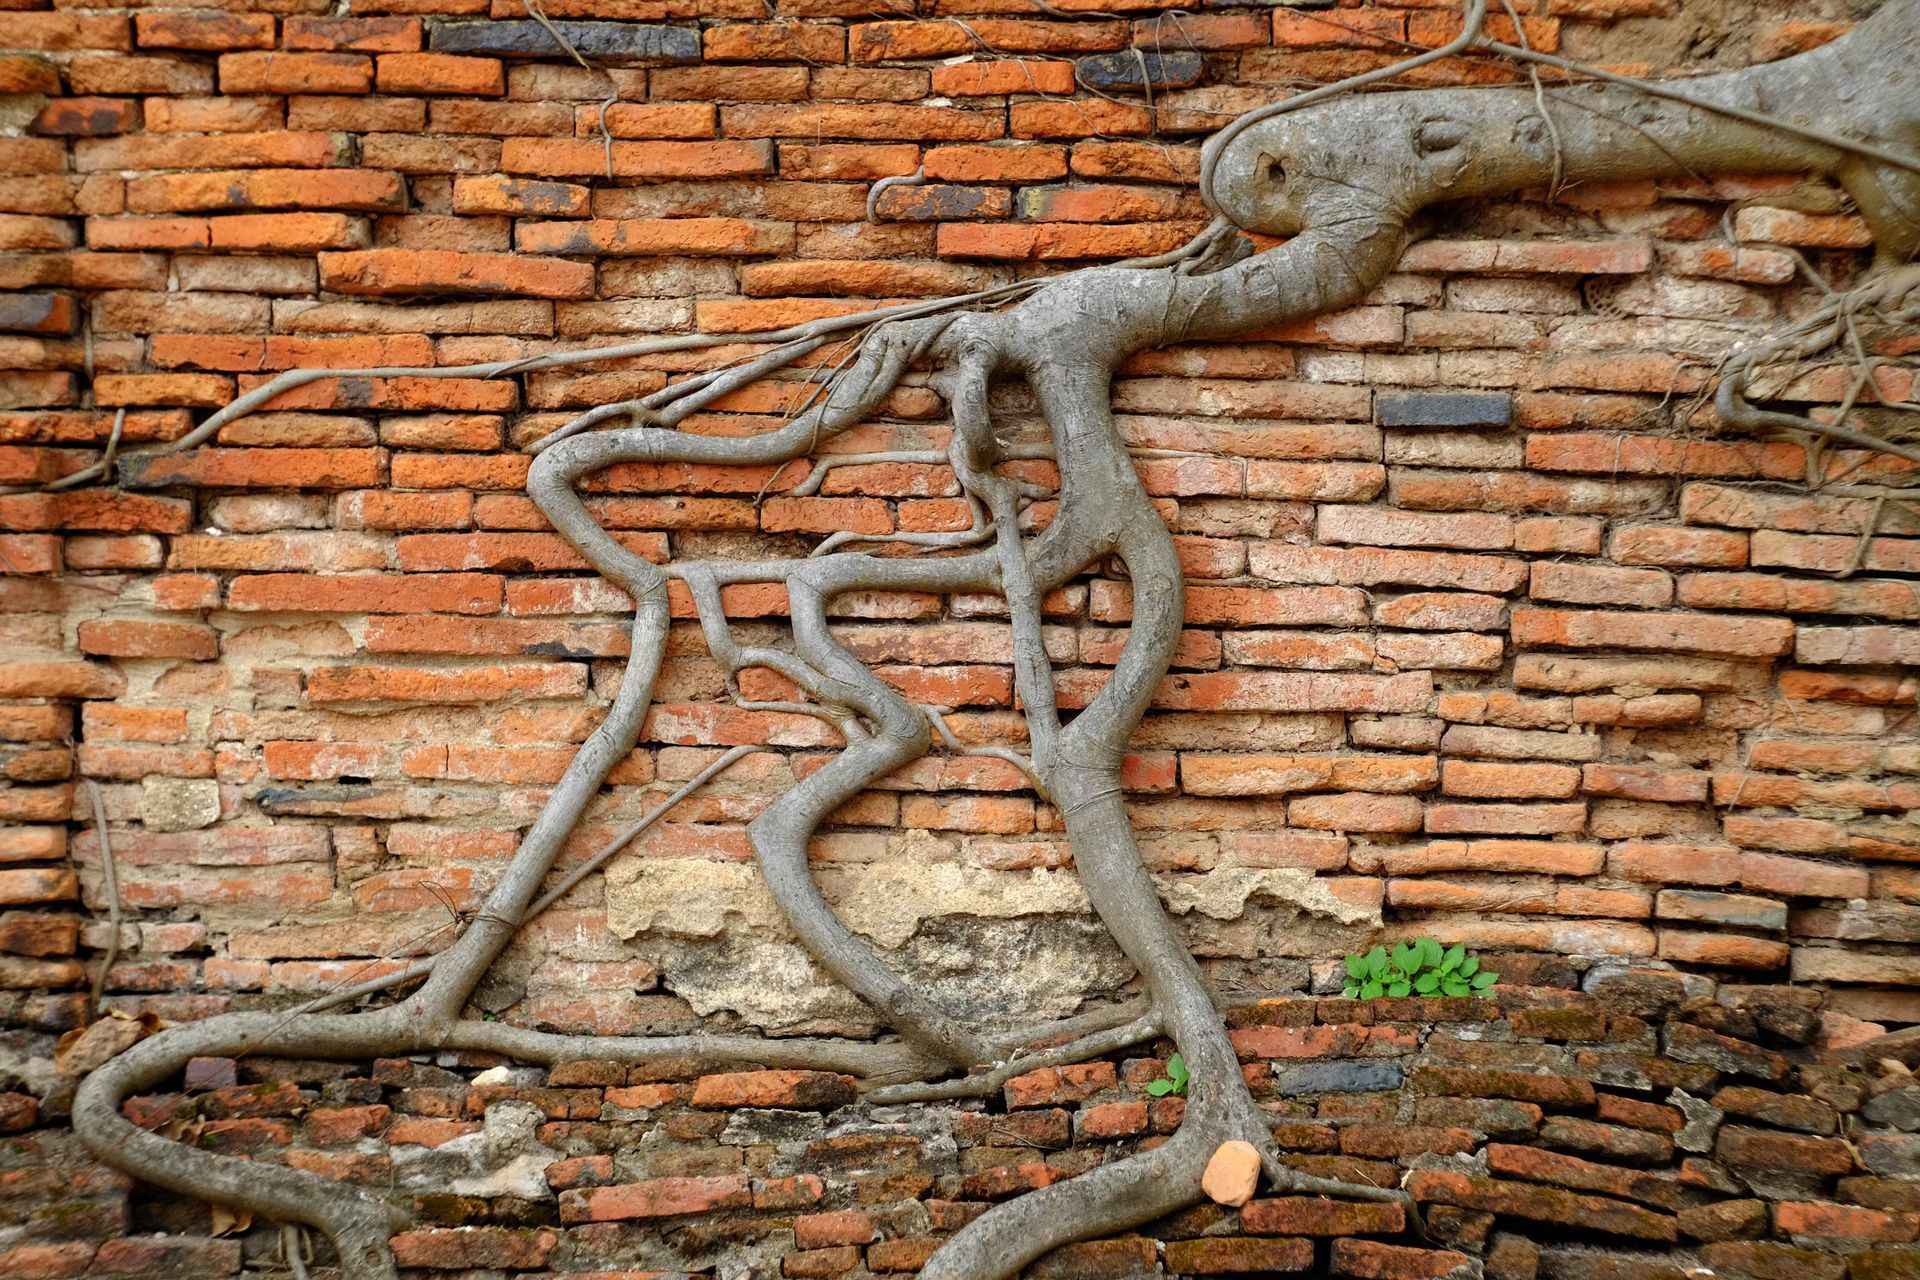 An image of tree roots growing through a brick foundation.